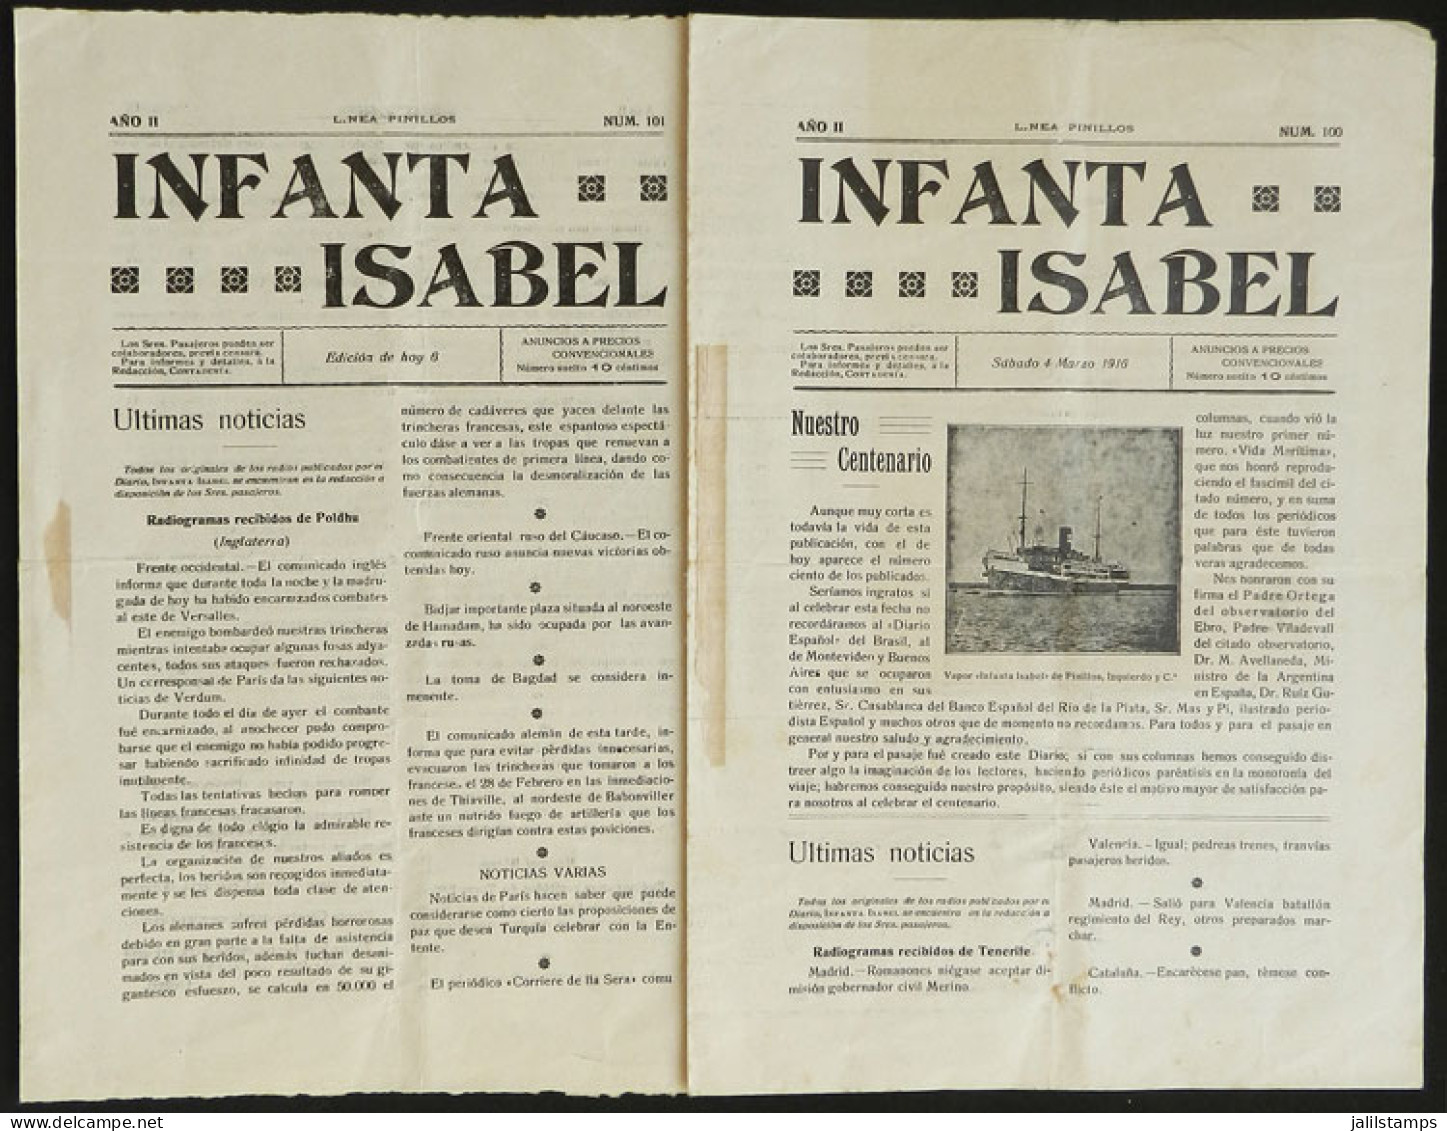 SPAIN: 2 Periodicals Of The Ship INFANTA ISABEL En Route To Europe (4 And 6 March 1916, Issue 100 And 101), The First On - Zonder Classificatie